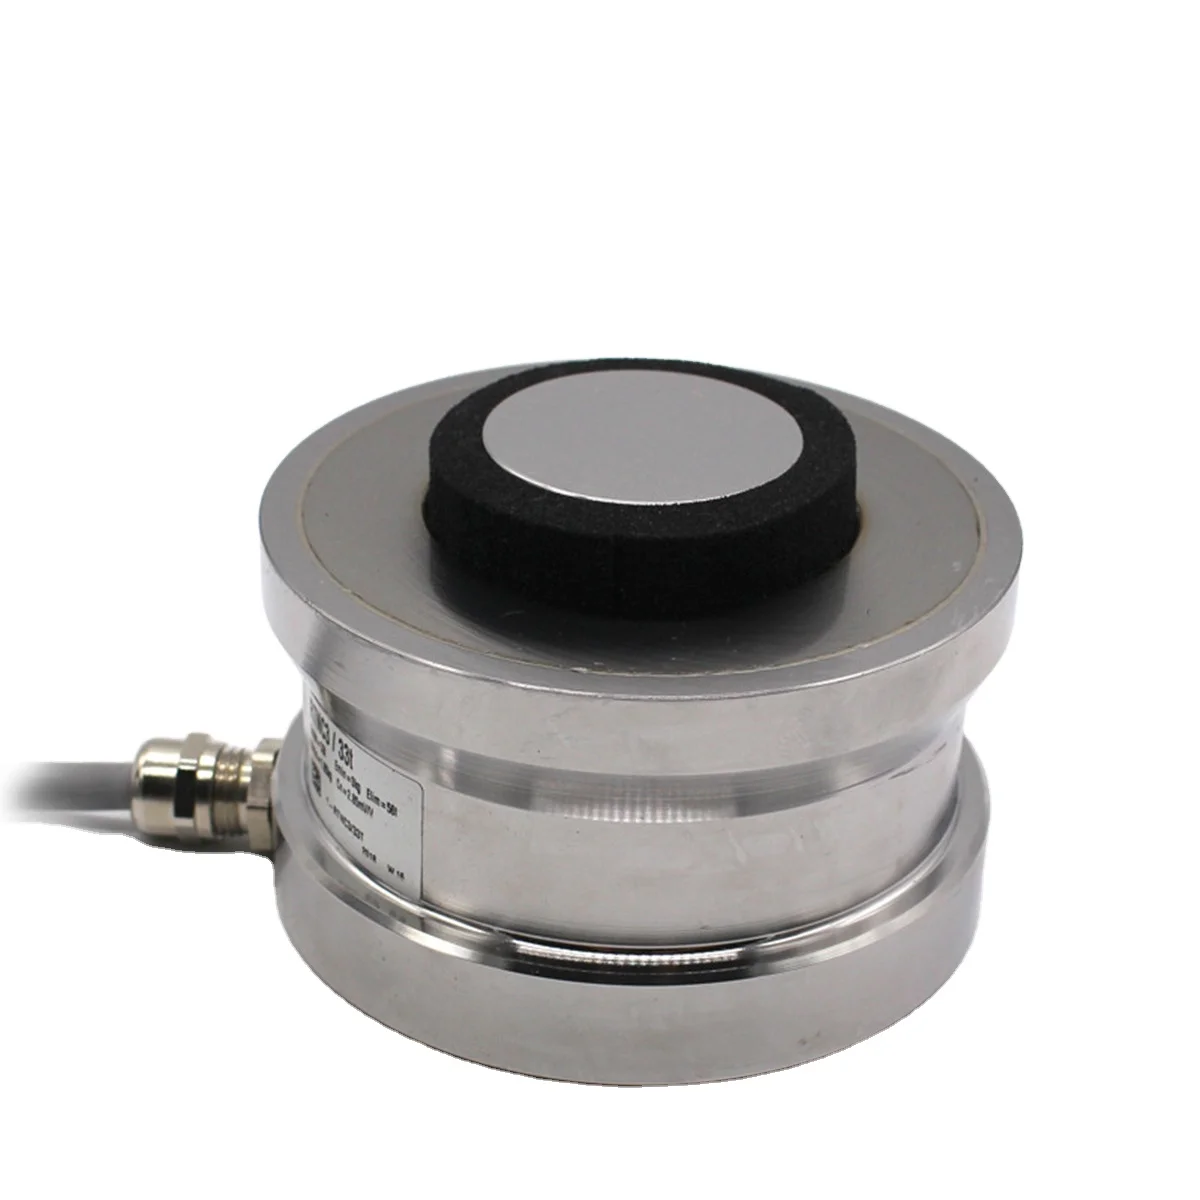 

Good products HBM RTN C3/ 4.7t weighing scale sensor stainless steel 4.7 T alloy steel load cell ton